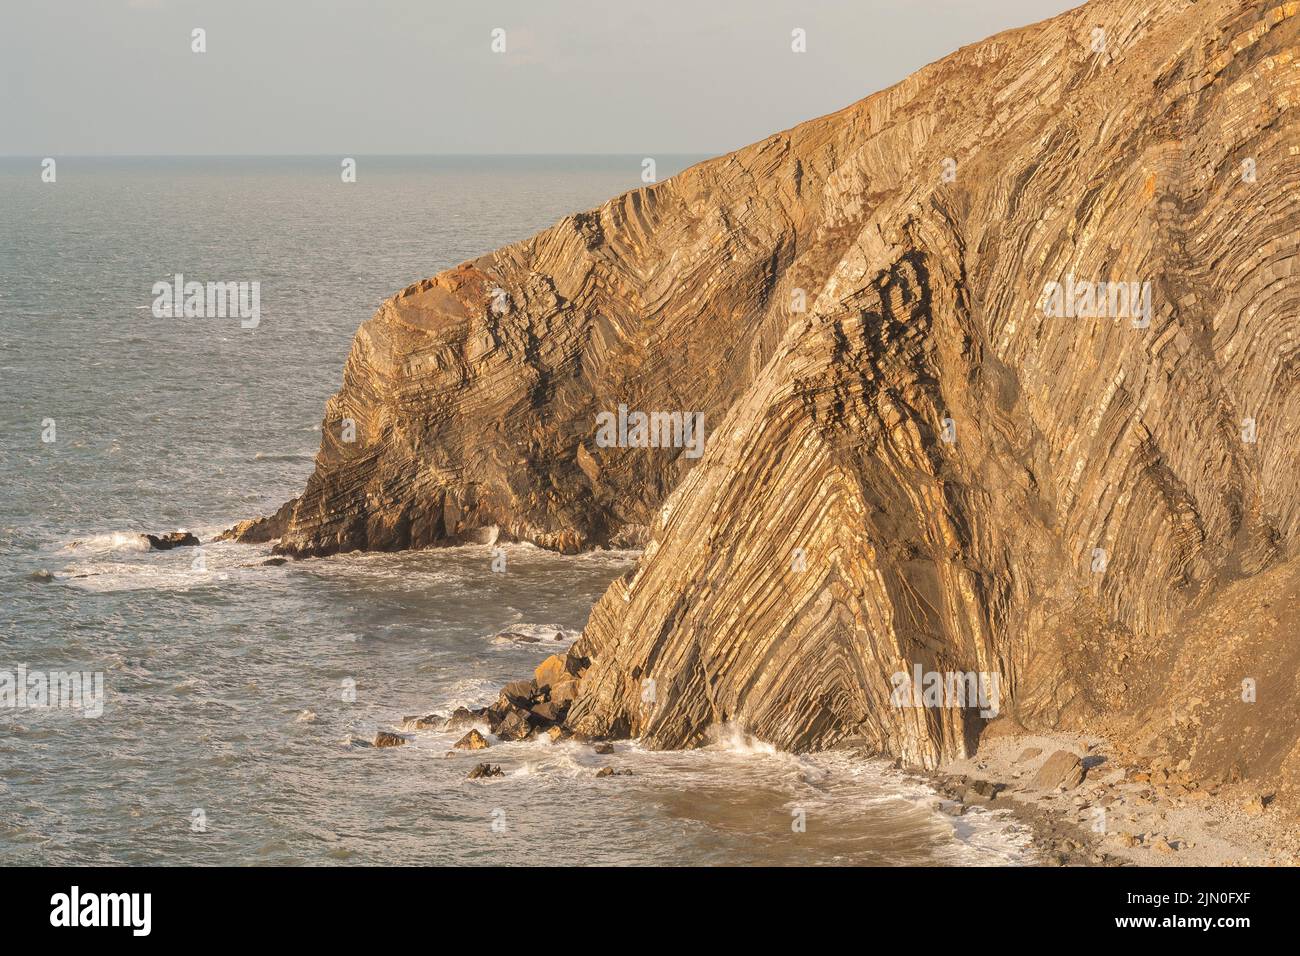 Angular anticlinal fold Traeth Godi'r Coch Cemaes Head Pembrokeshire Wales UK Europe.  Atlantic Grey Seals can be seen hauled out on the rocky beach. Stock Photo